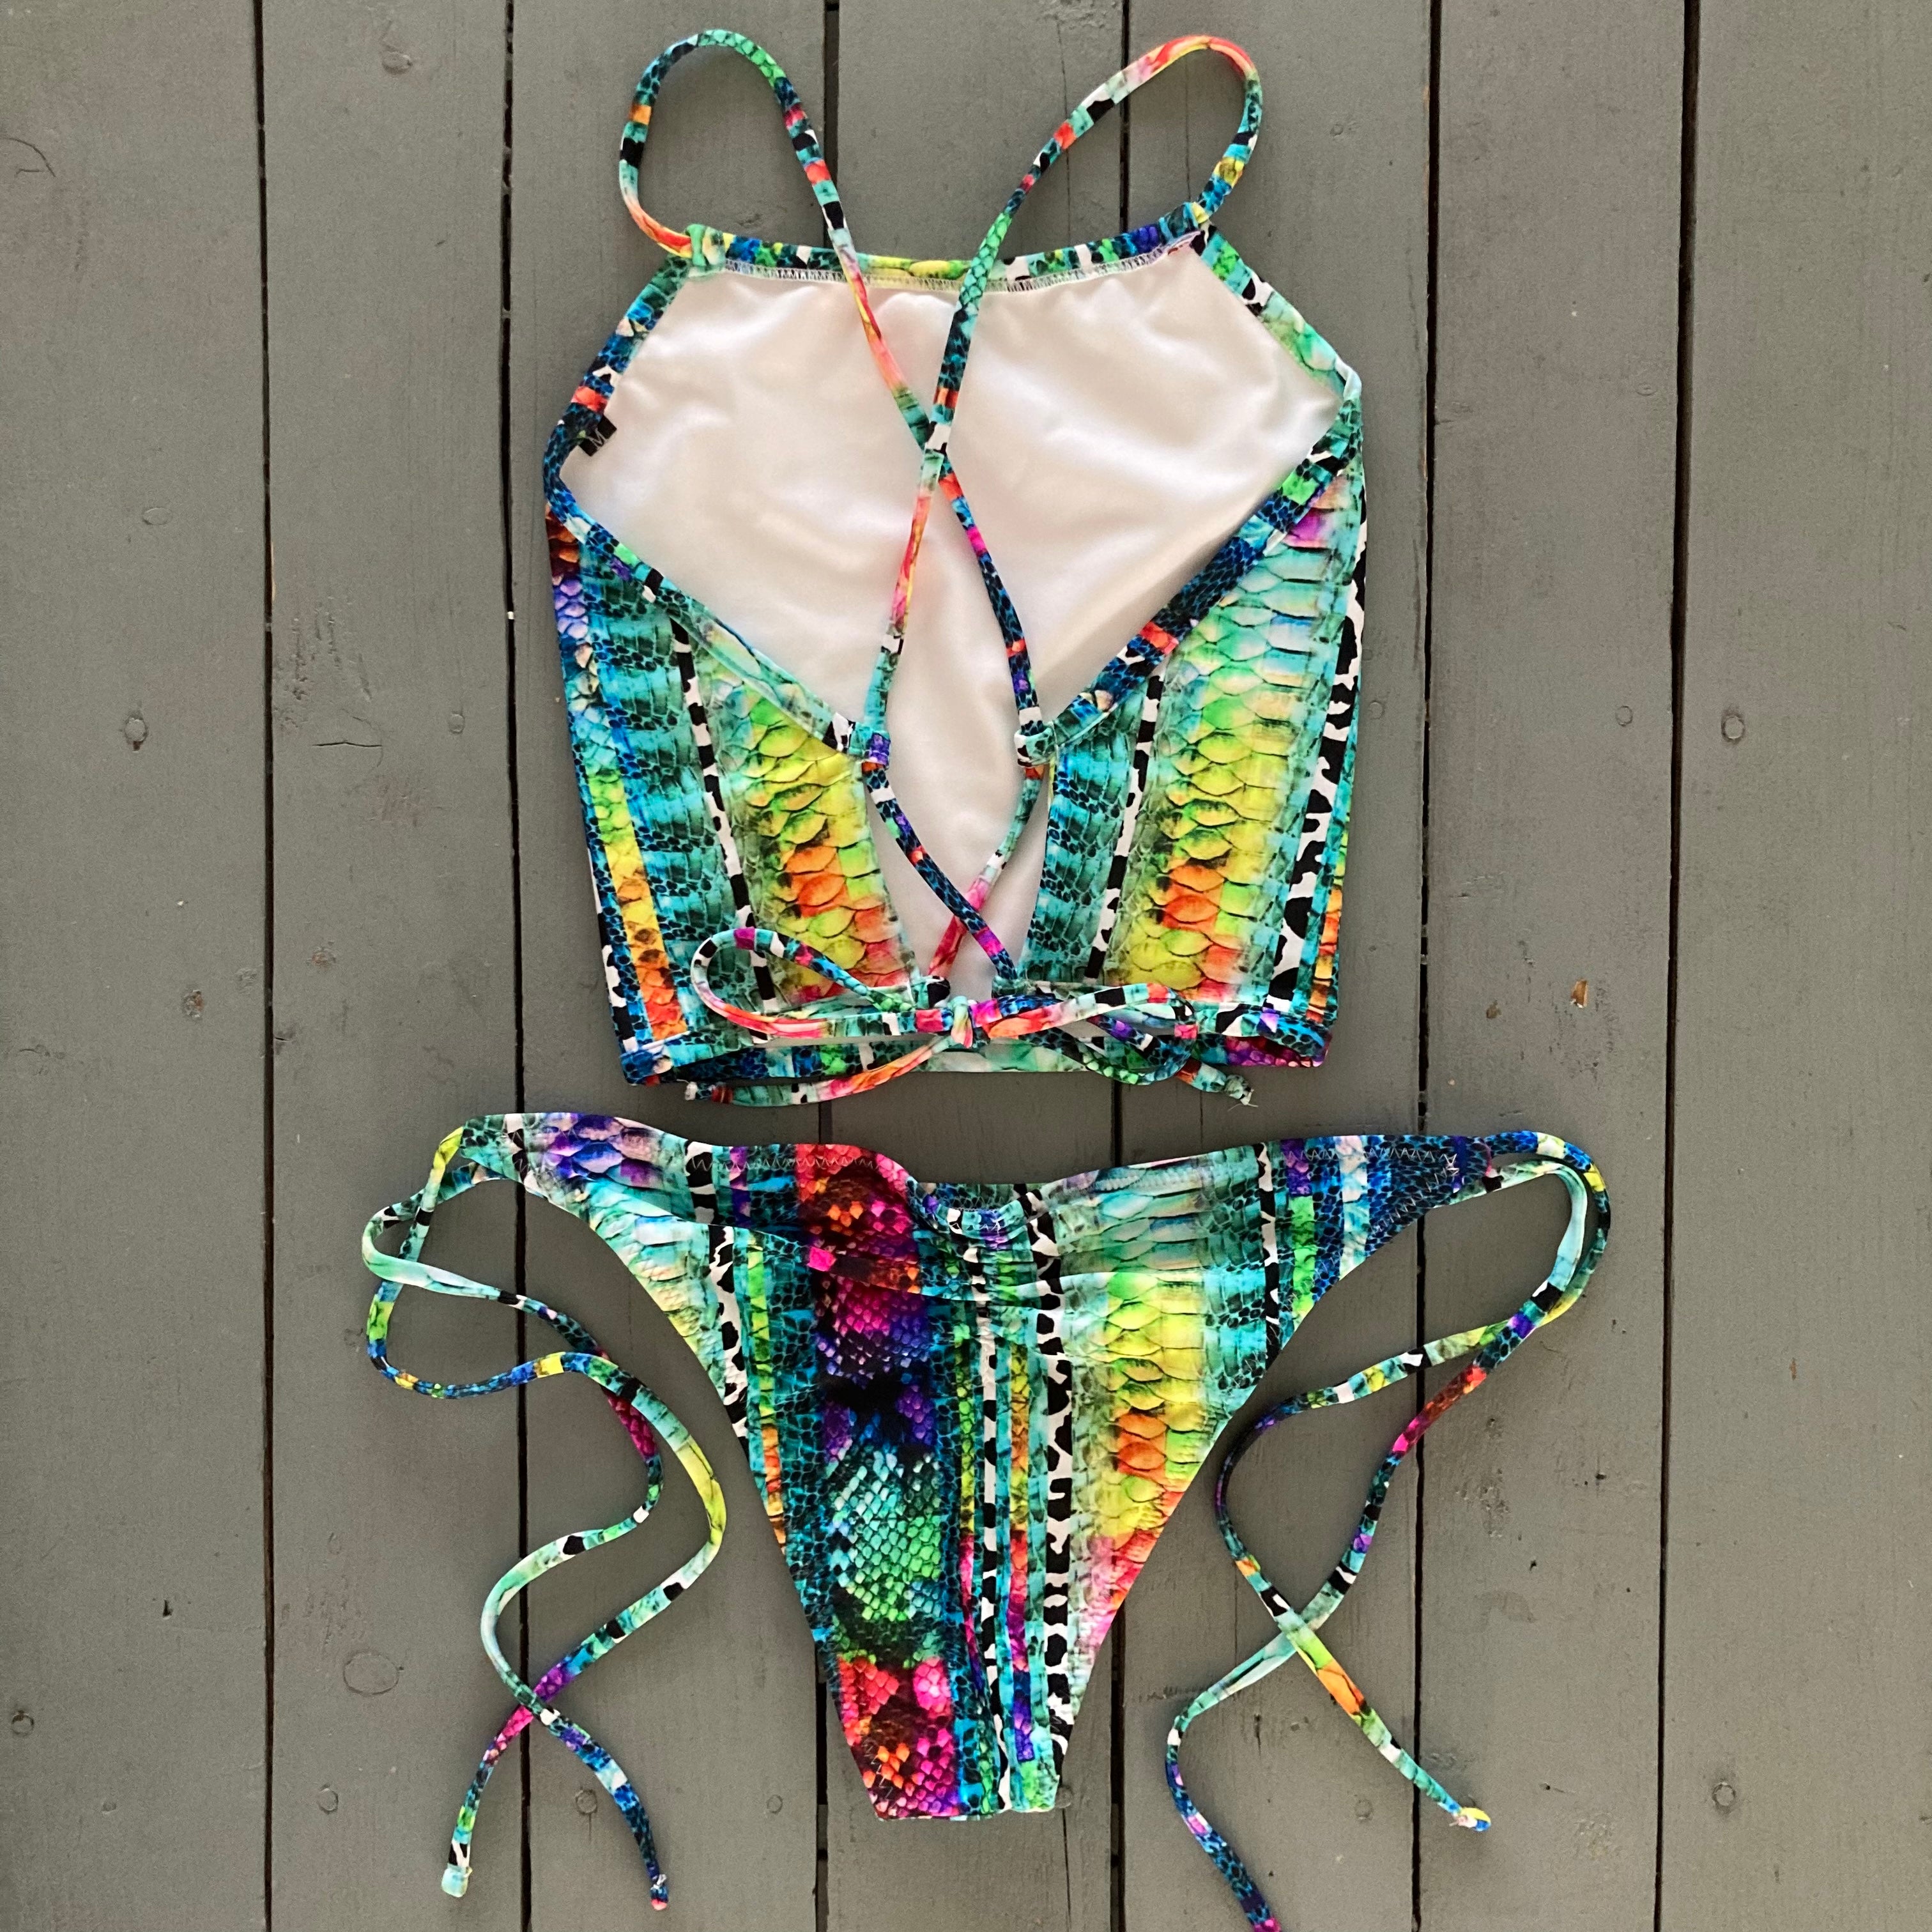 This super cute snakeskin halter top is bursting with colors. So bright and colorful and adjusts in the back for that perfect fit. Made with the finest high quality Lycra. Order yours today with a matching bright snakeskin bottom of your choice.